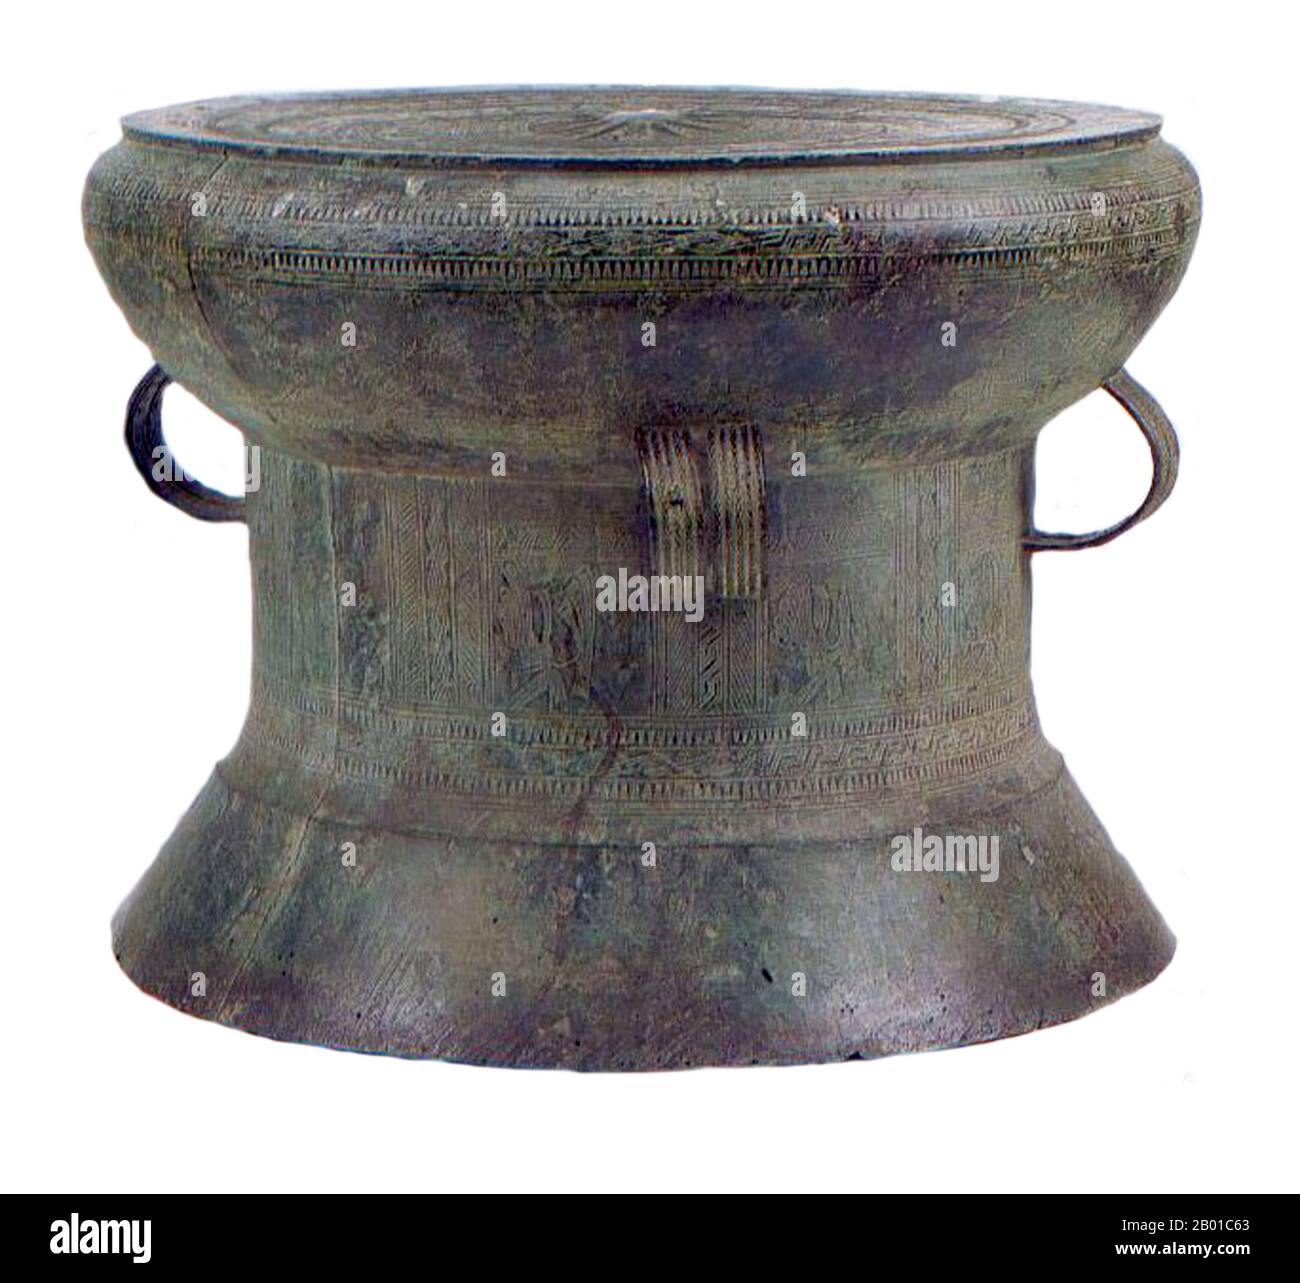 Vietnam: Dong Son bronze drum, c. 500-100 BCE.  Đông Sơn was a prehistoric Bronze Age culture in Vietnam centered on the Red River Valley of northern Vietnam. At this time the first Vietnamese kingdoms of Văn Lang and Âu Lạc appeared. Its influence flourished in other neighbouring parts of Southeast Asia from about 500 BCE to 100 CE. Stock Photo